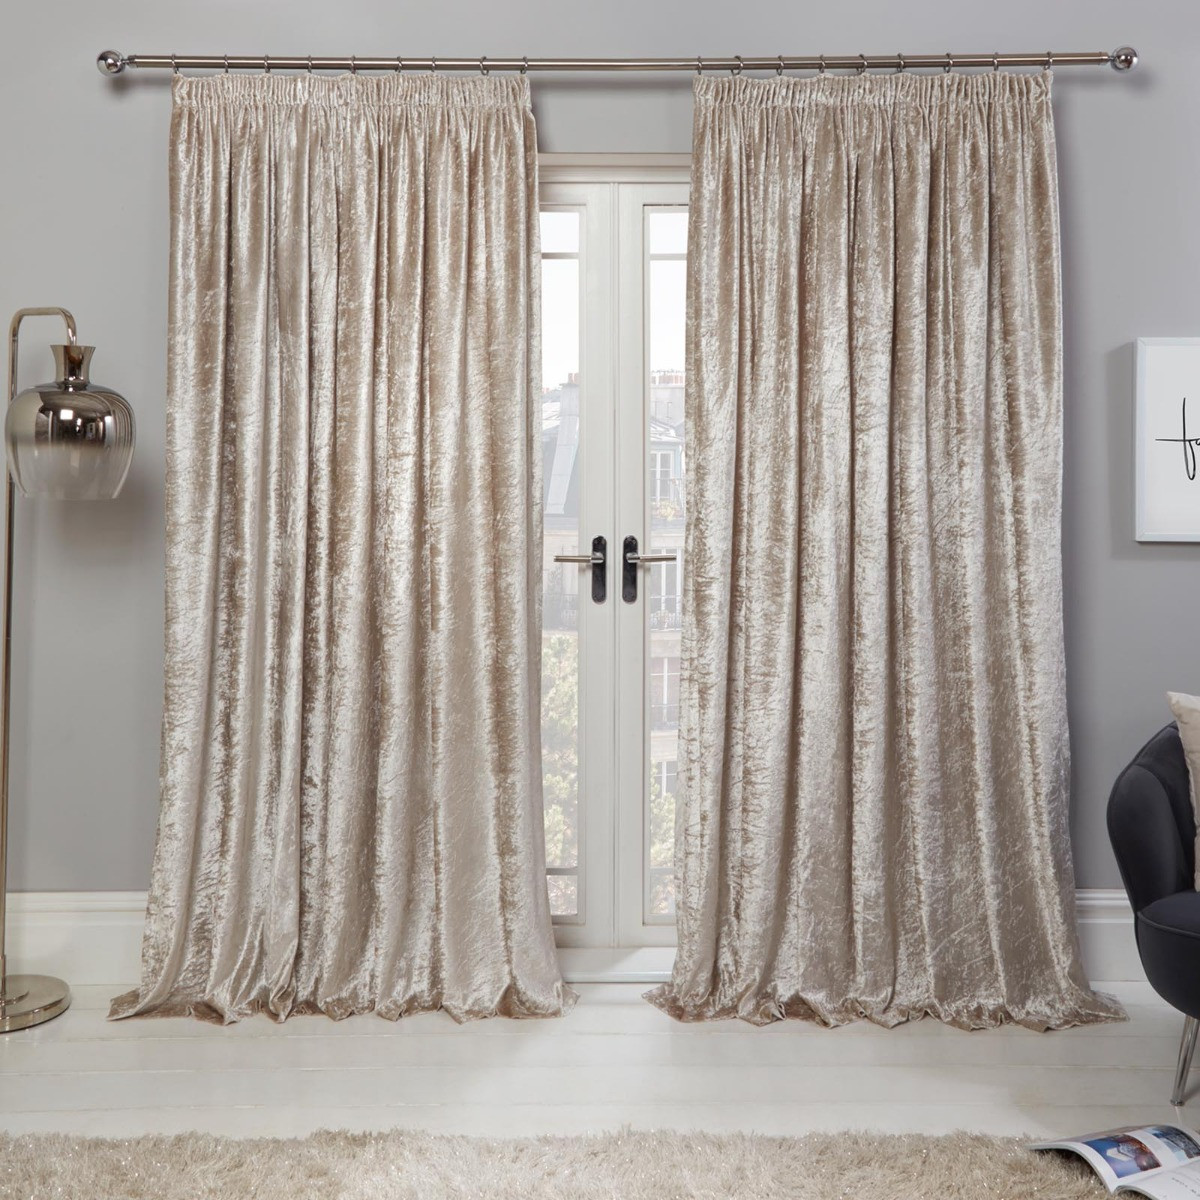 Sienna Crushed Velvet Pencil Pleat Curtains - Natural>